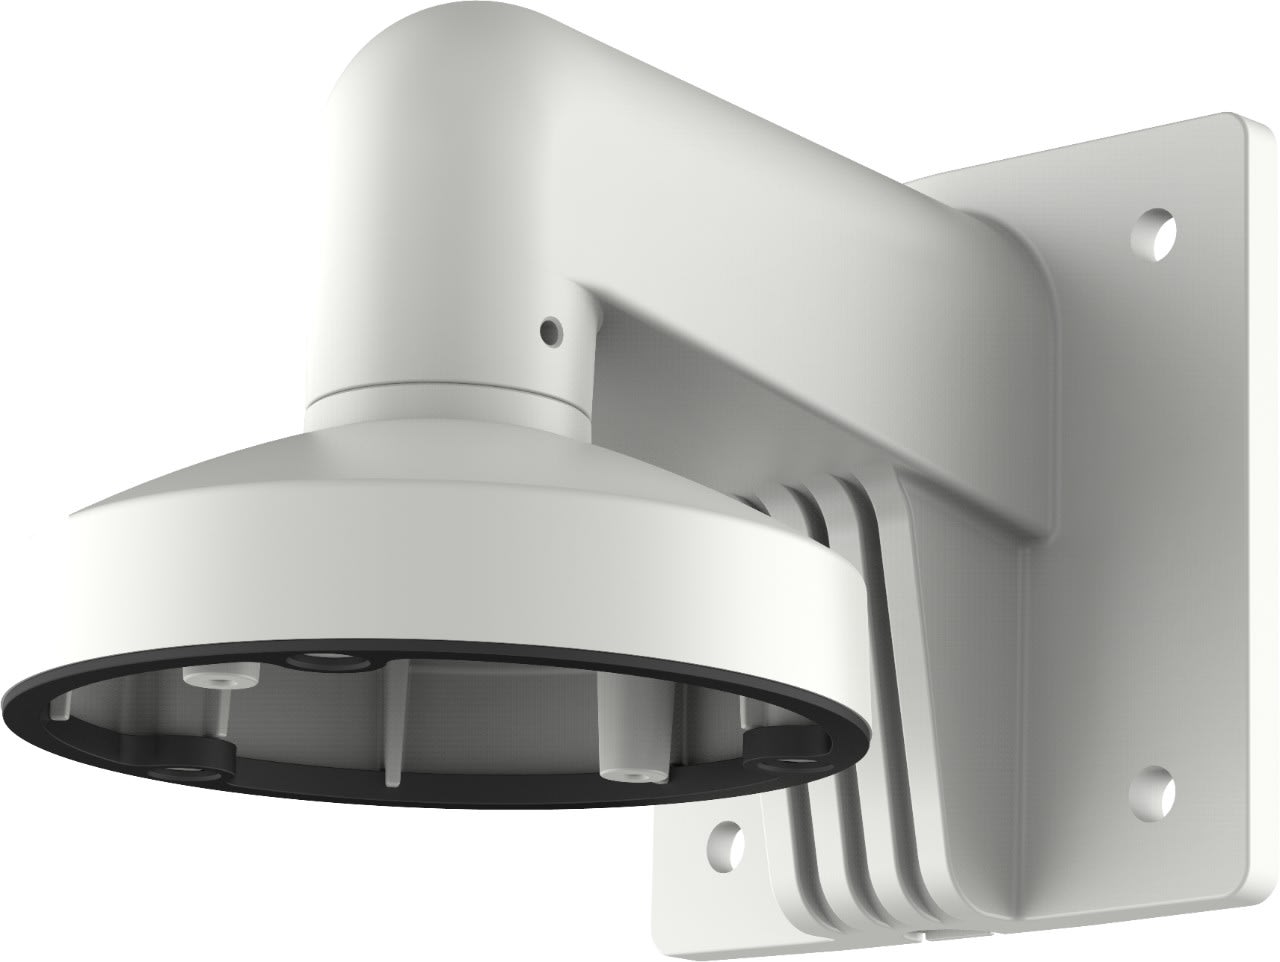 Hikvision - Hikvision Support murale pour dome,